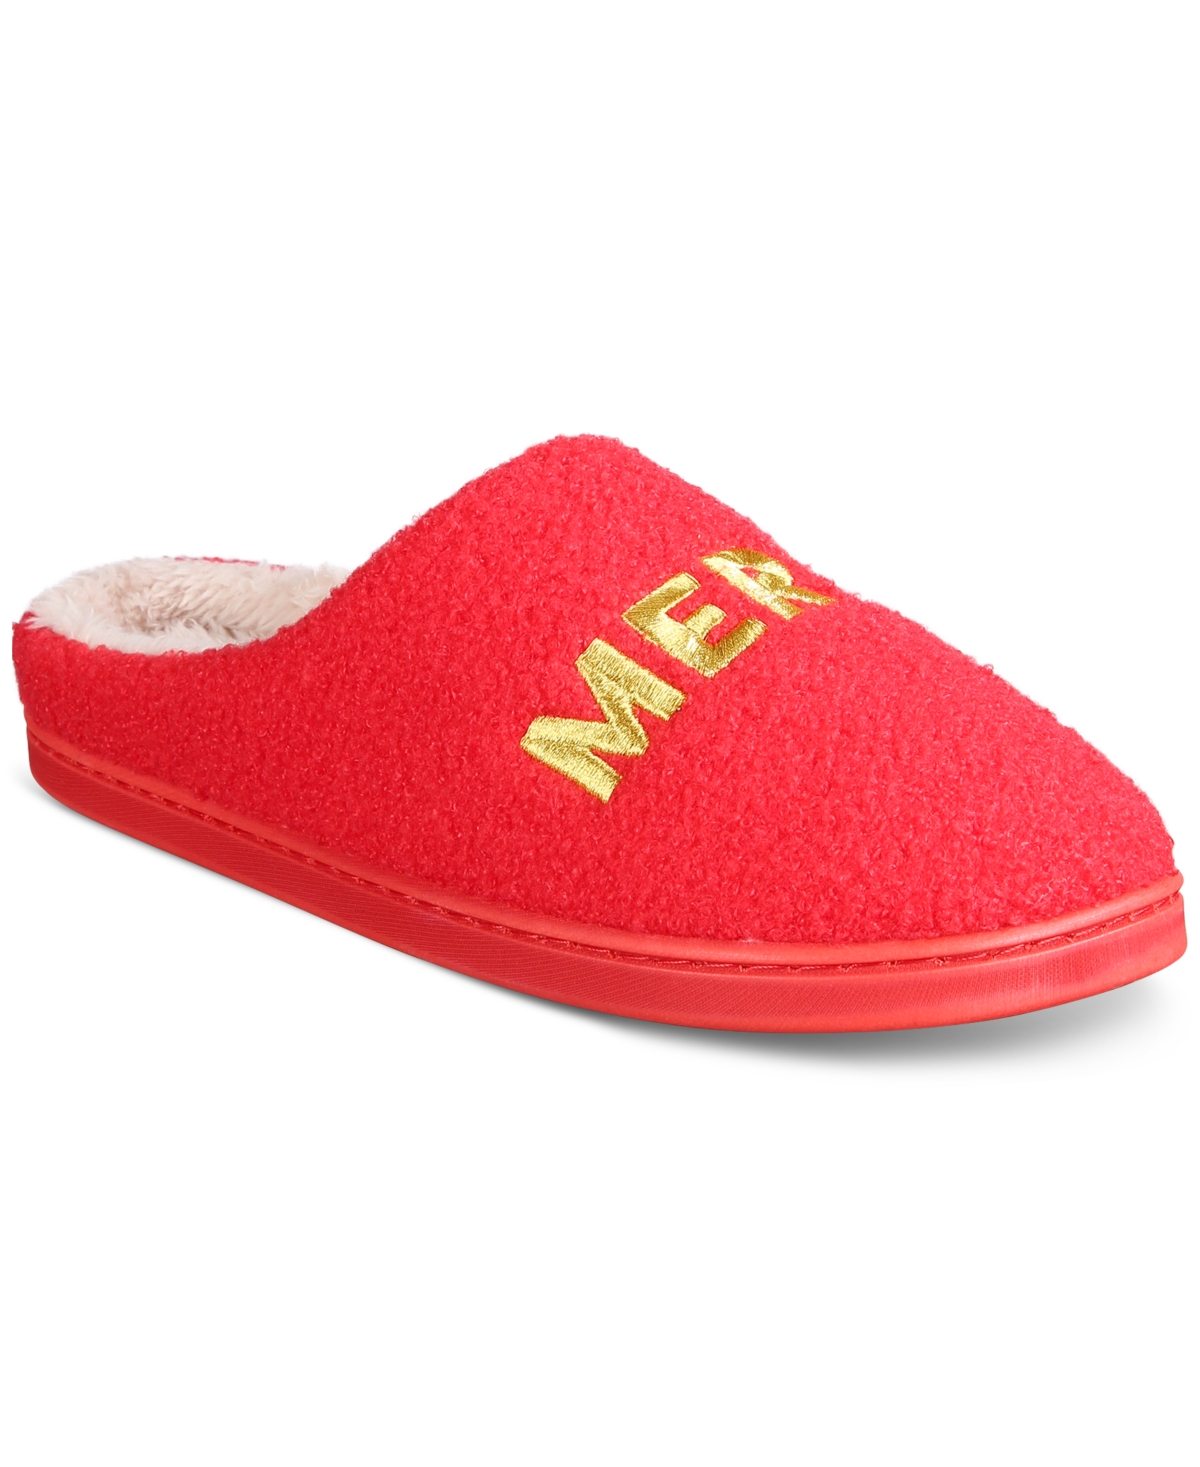 Women's Boxed Slippers, Created for Macy's - Merry Vibes